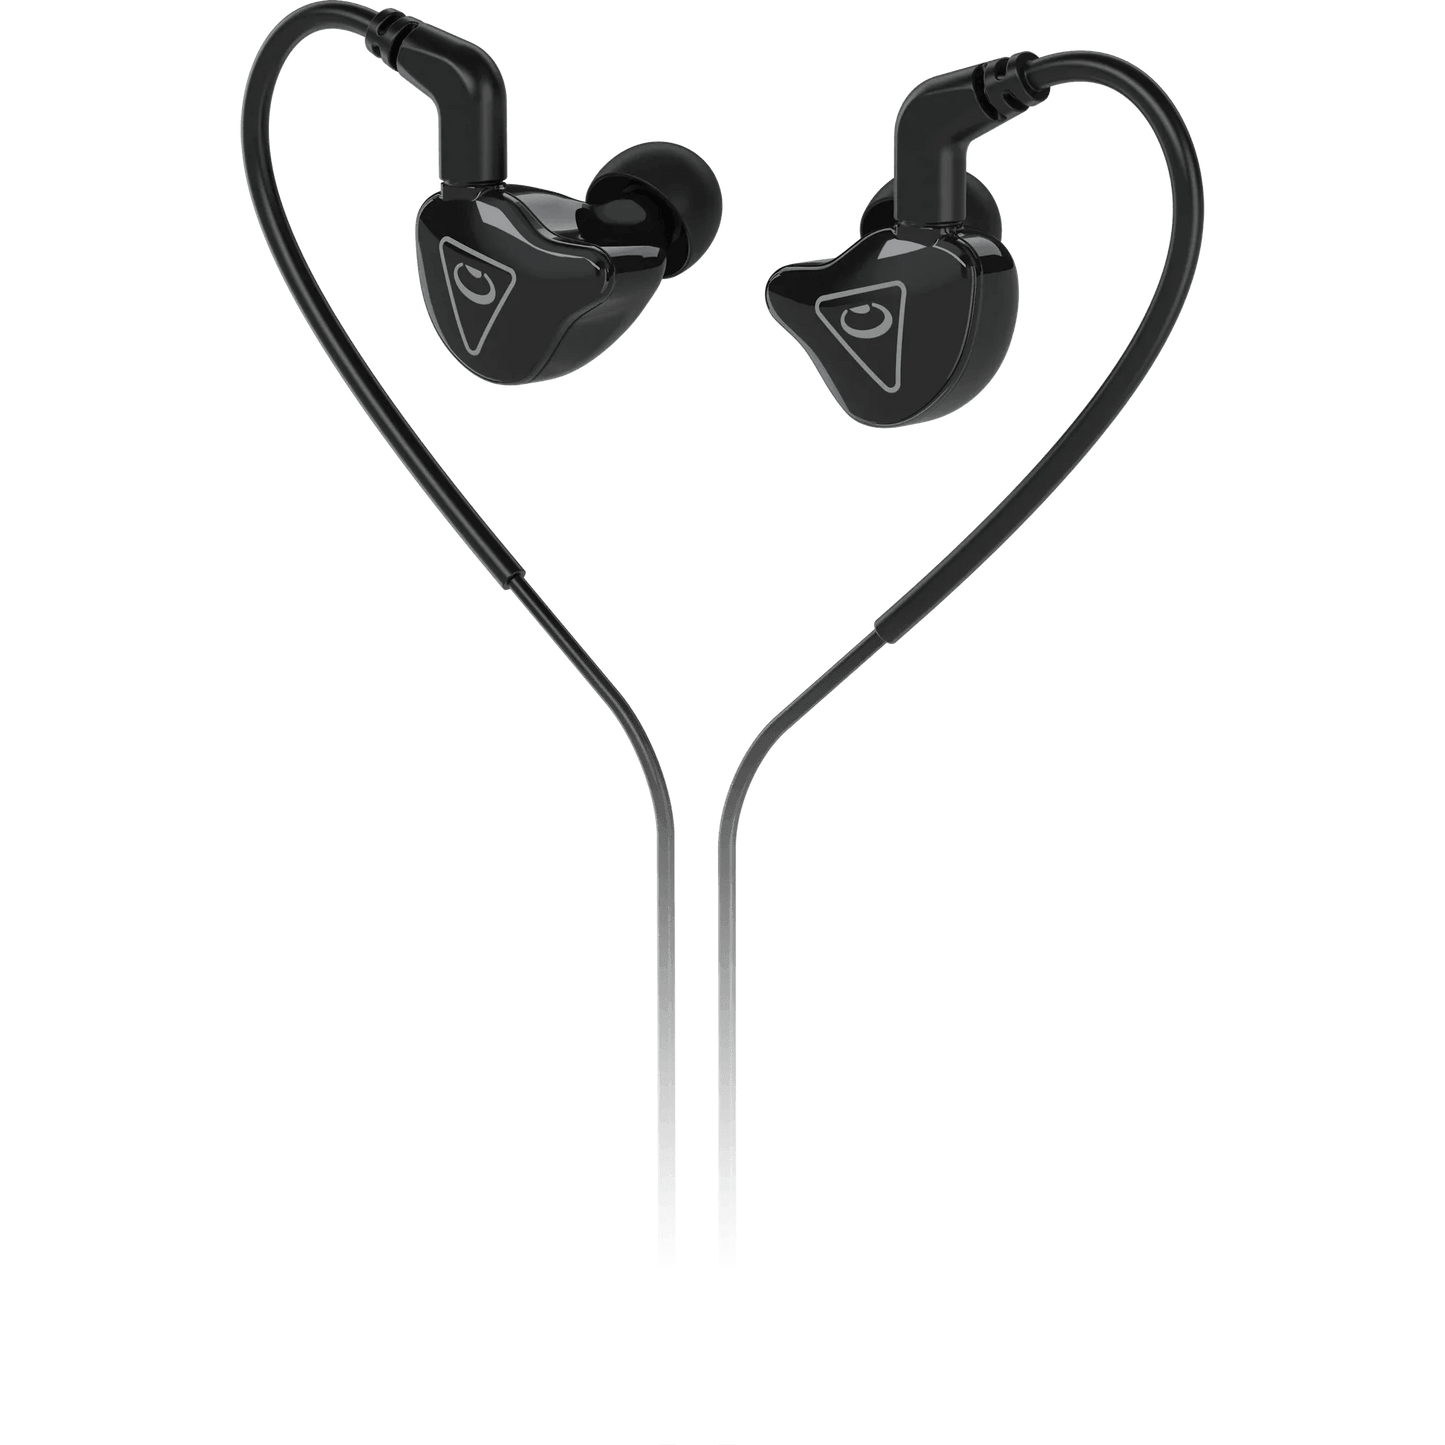 Behringer MO240 Studio Monitoring Earphones with Dual Hybrid Drivers